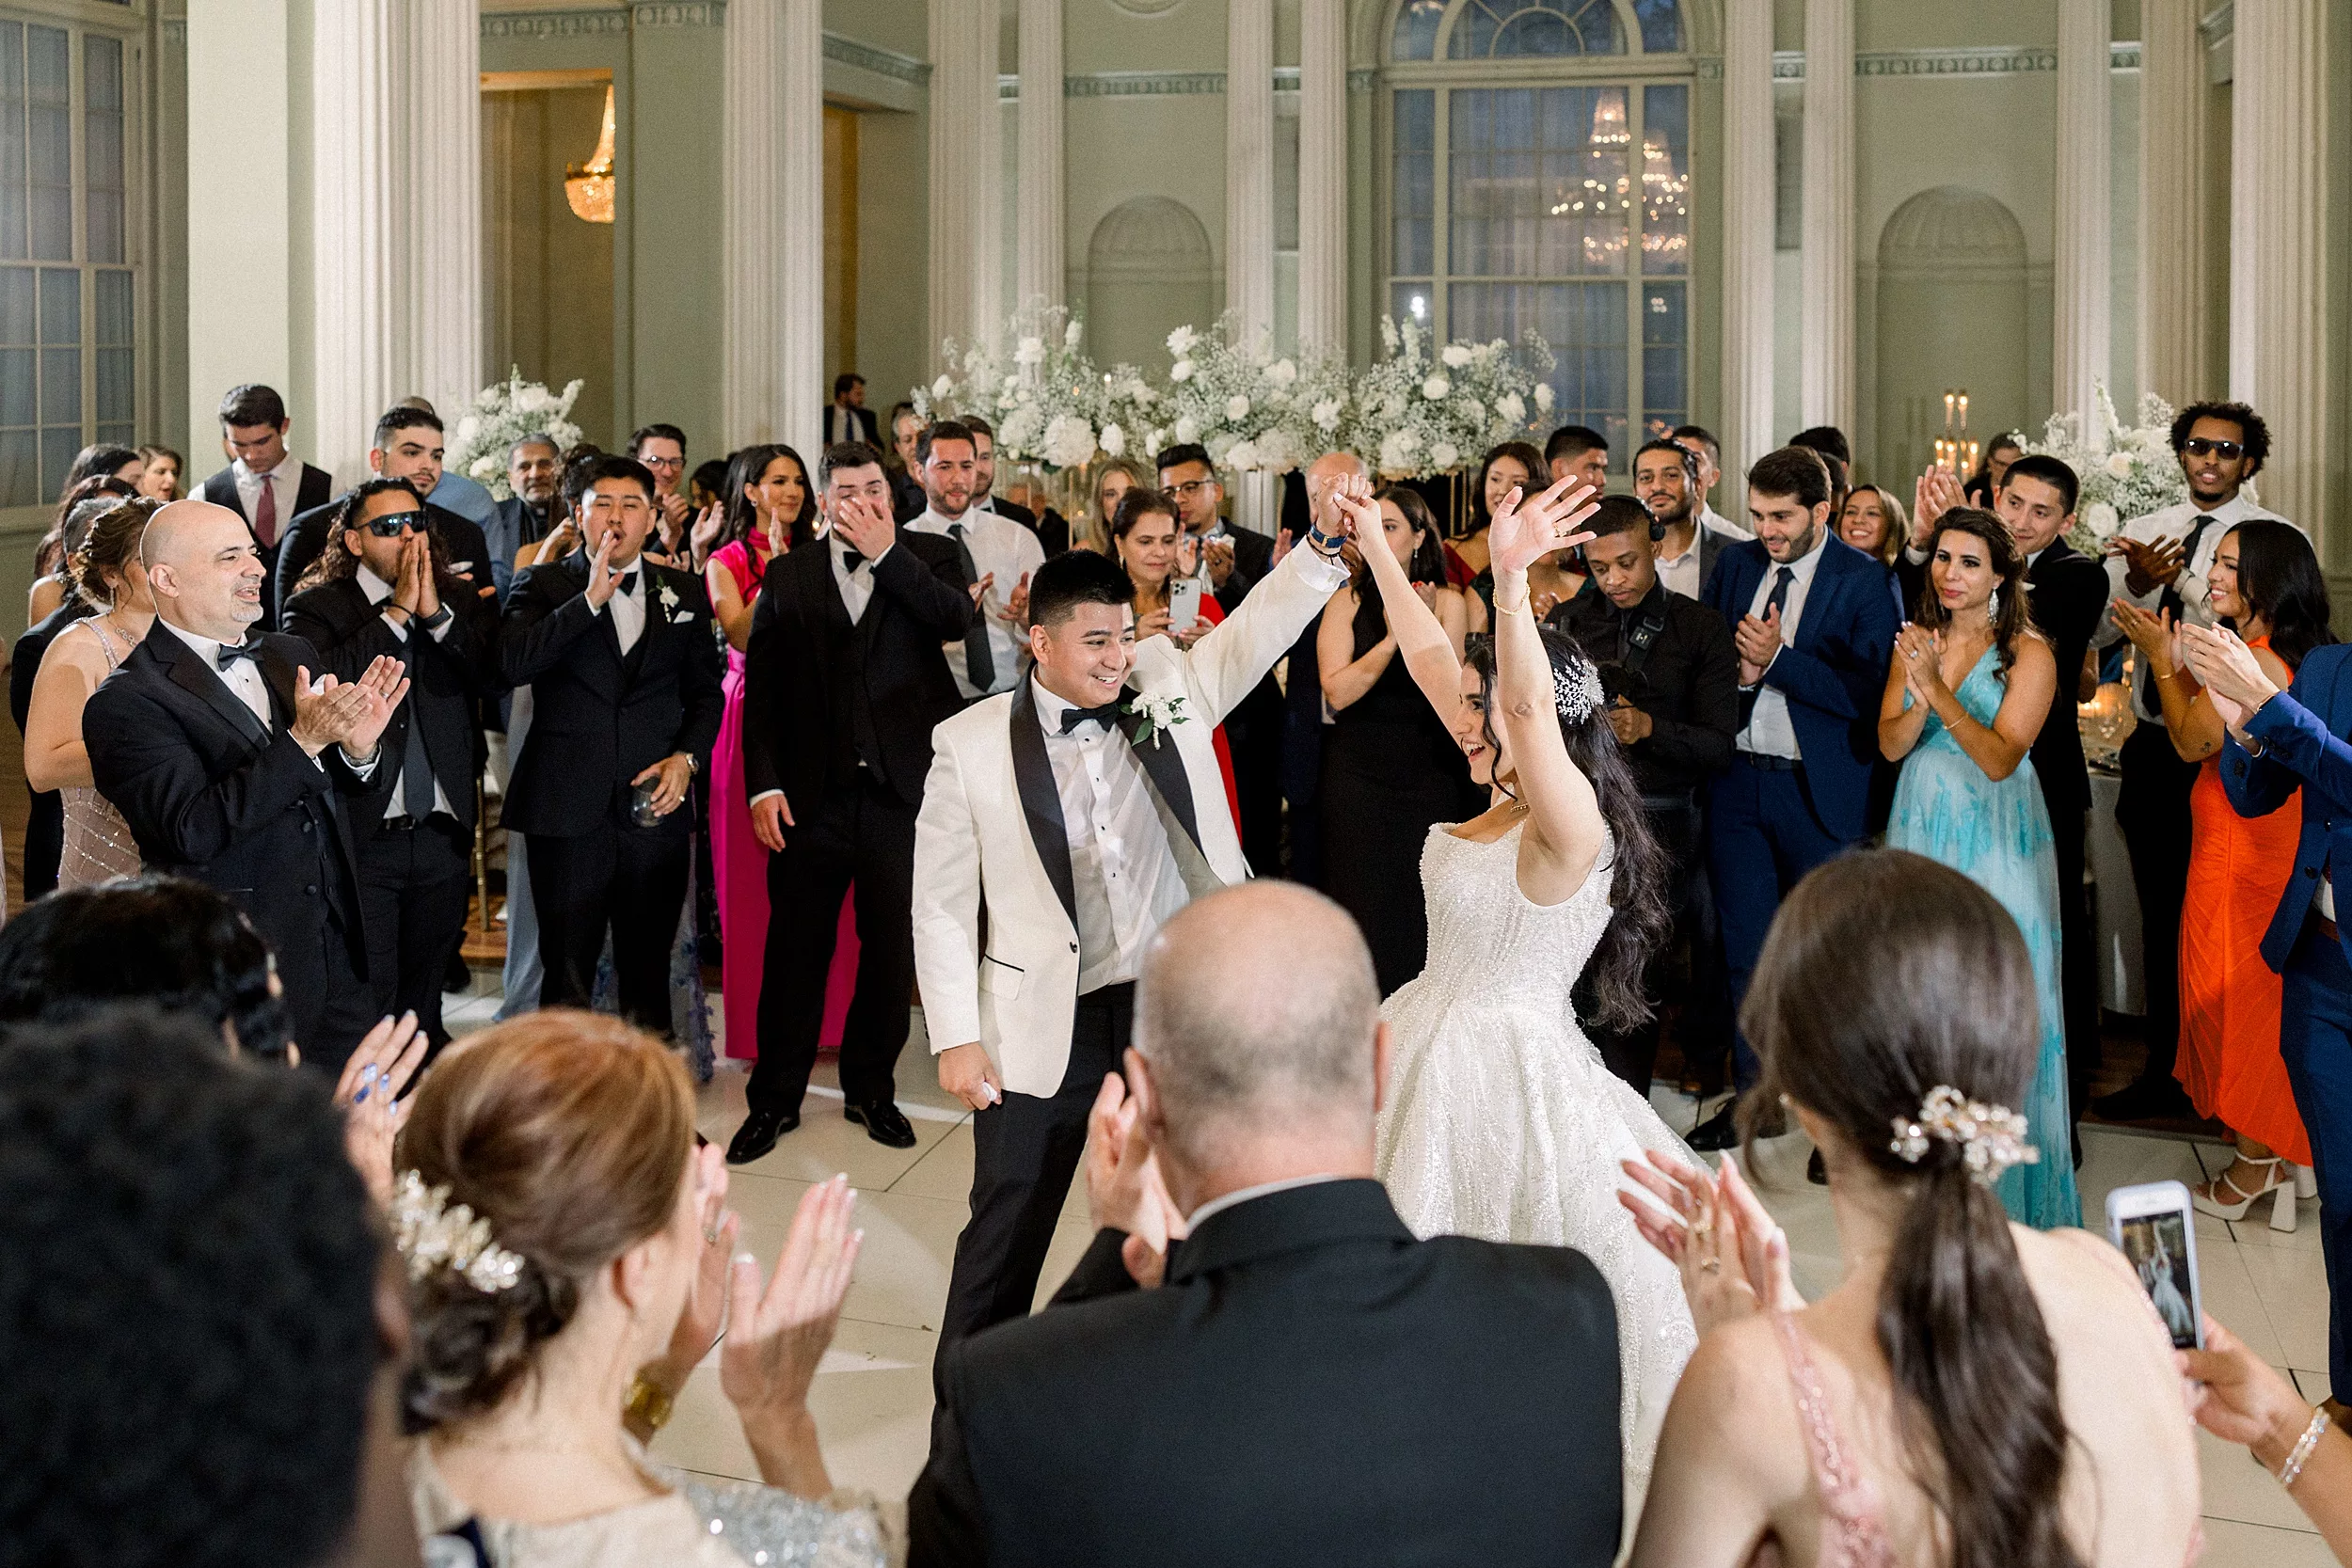 Newlyweds dance on while surrounded by guests at their wedding